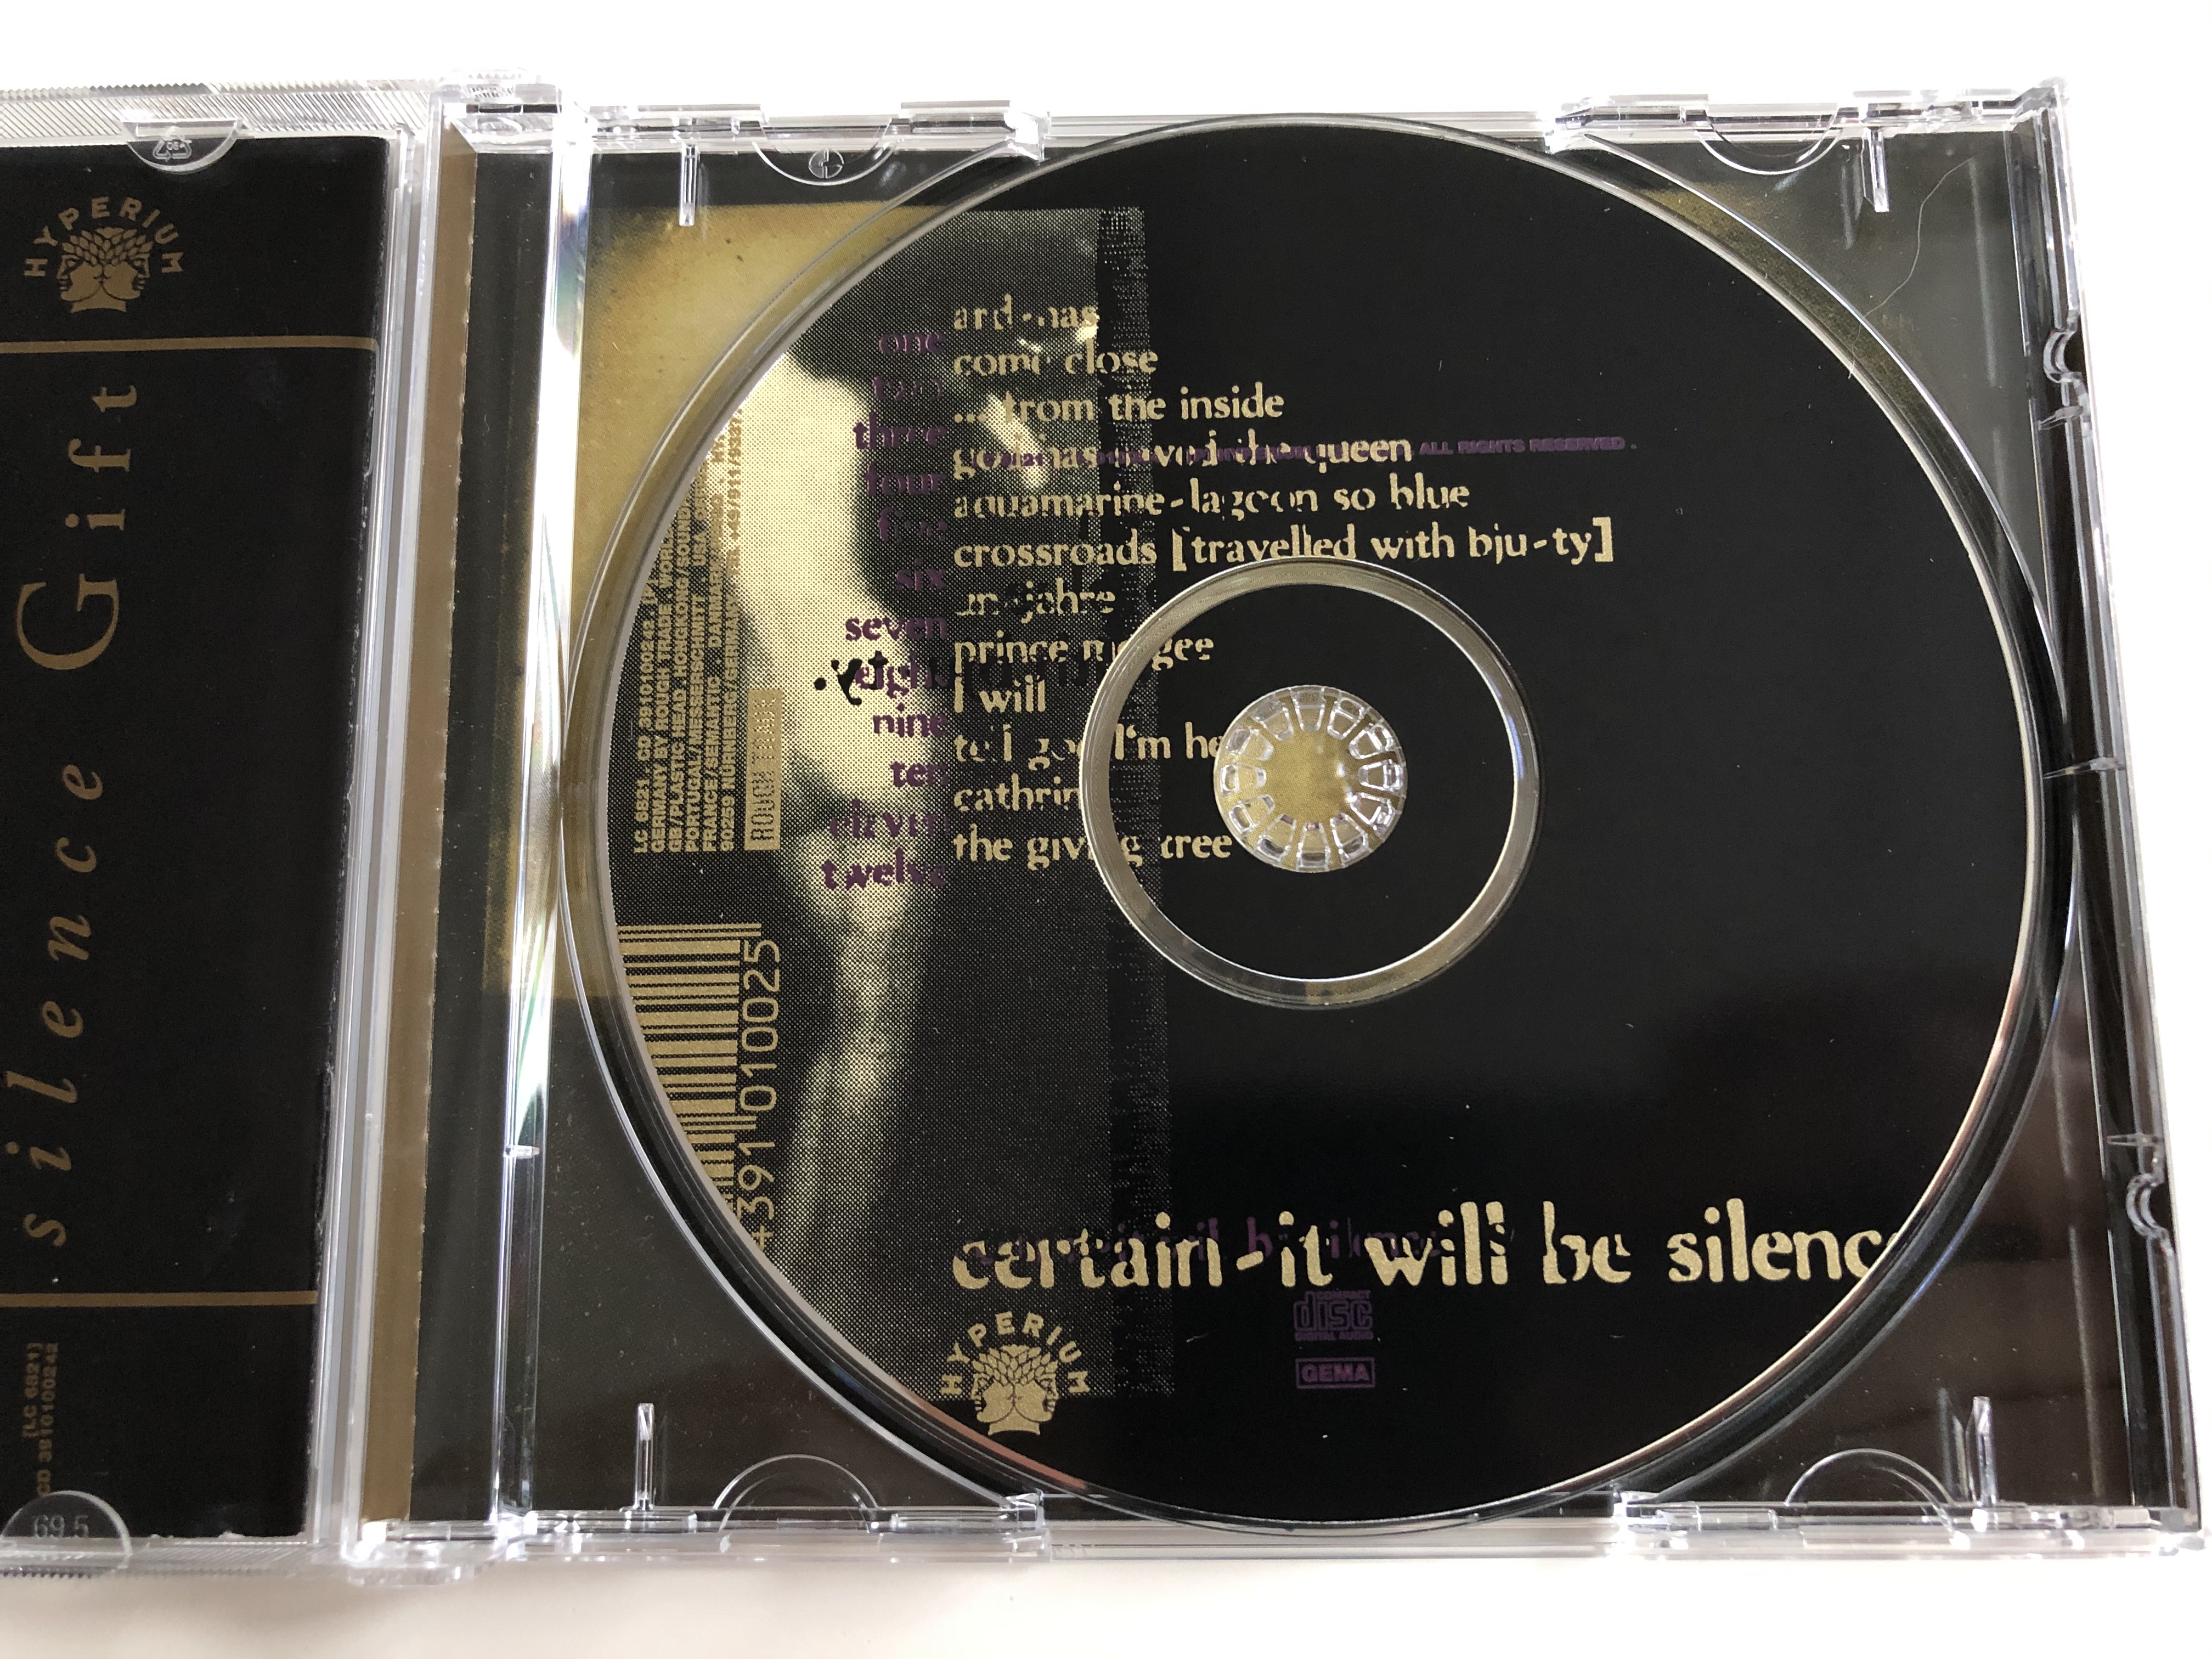 silence-gift-bju-ty-the-skin-is-broken-by-tears-hyperium-records-audio-cd-1994-39101002-42-7-.jpg